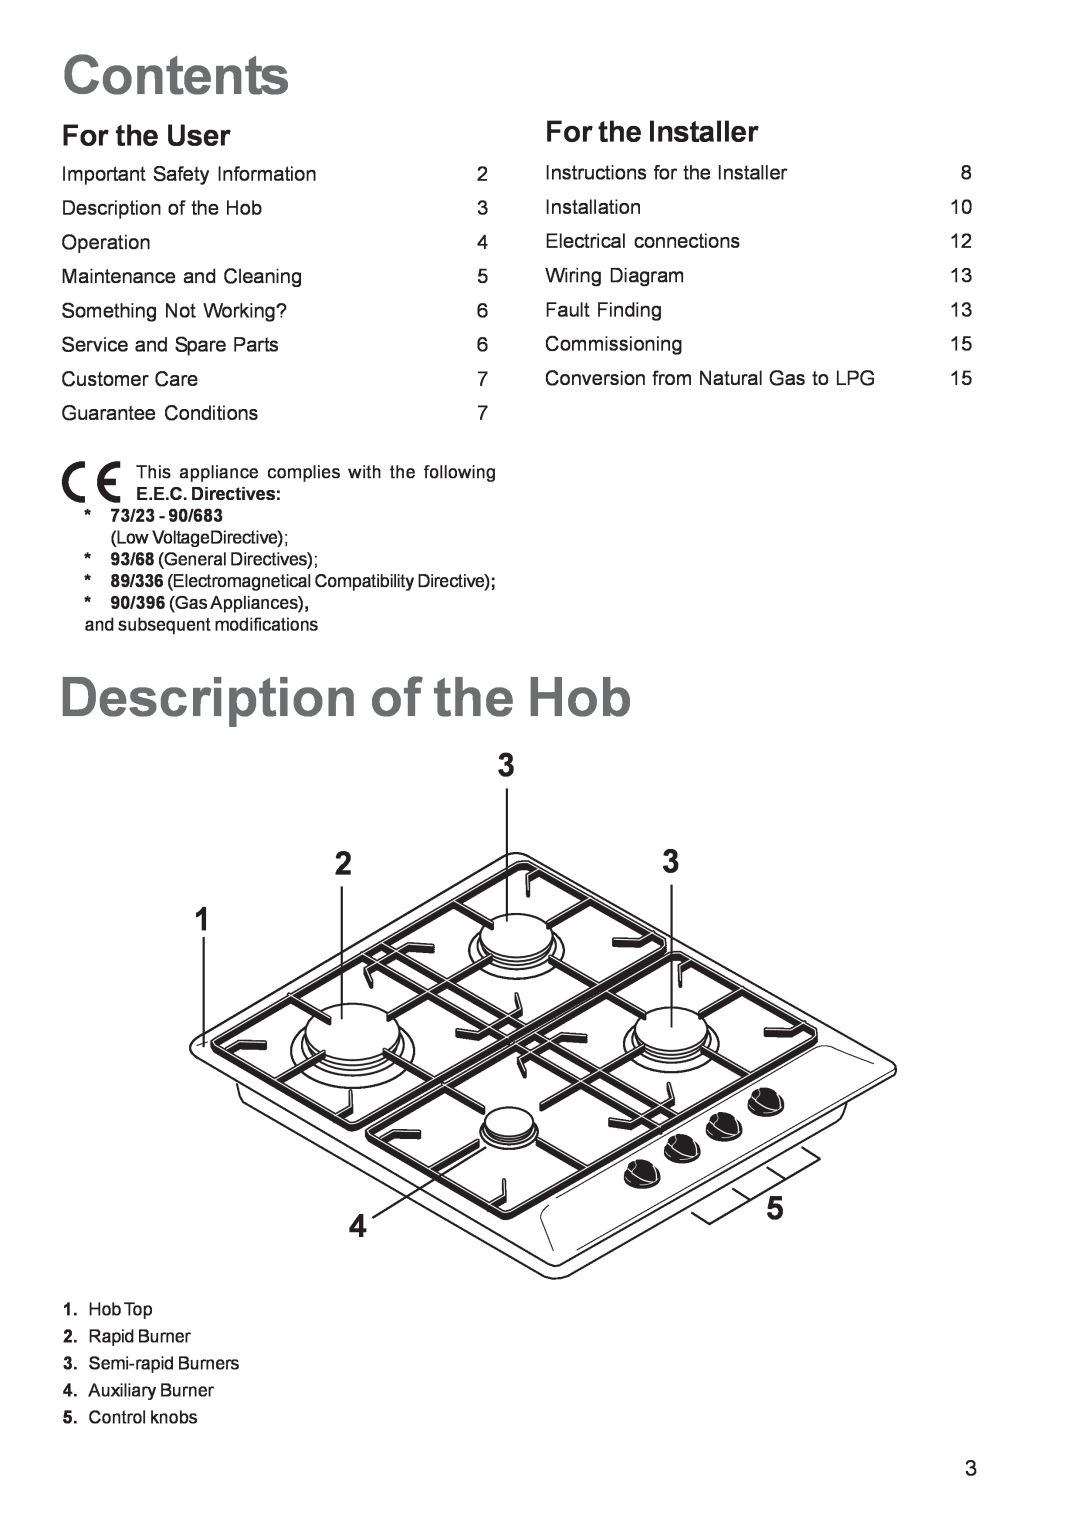 Zanussi ZGL 62 manual Contents, Description of the Hob, For the User, For the Installer 